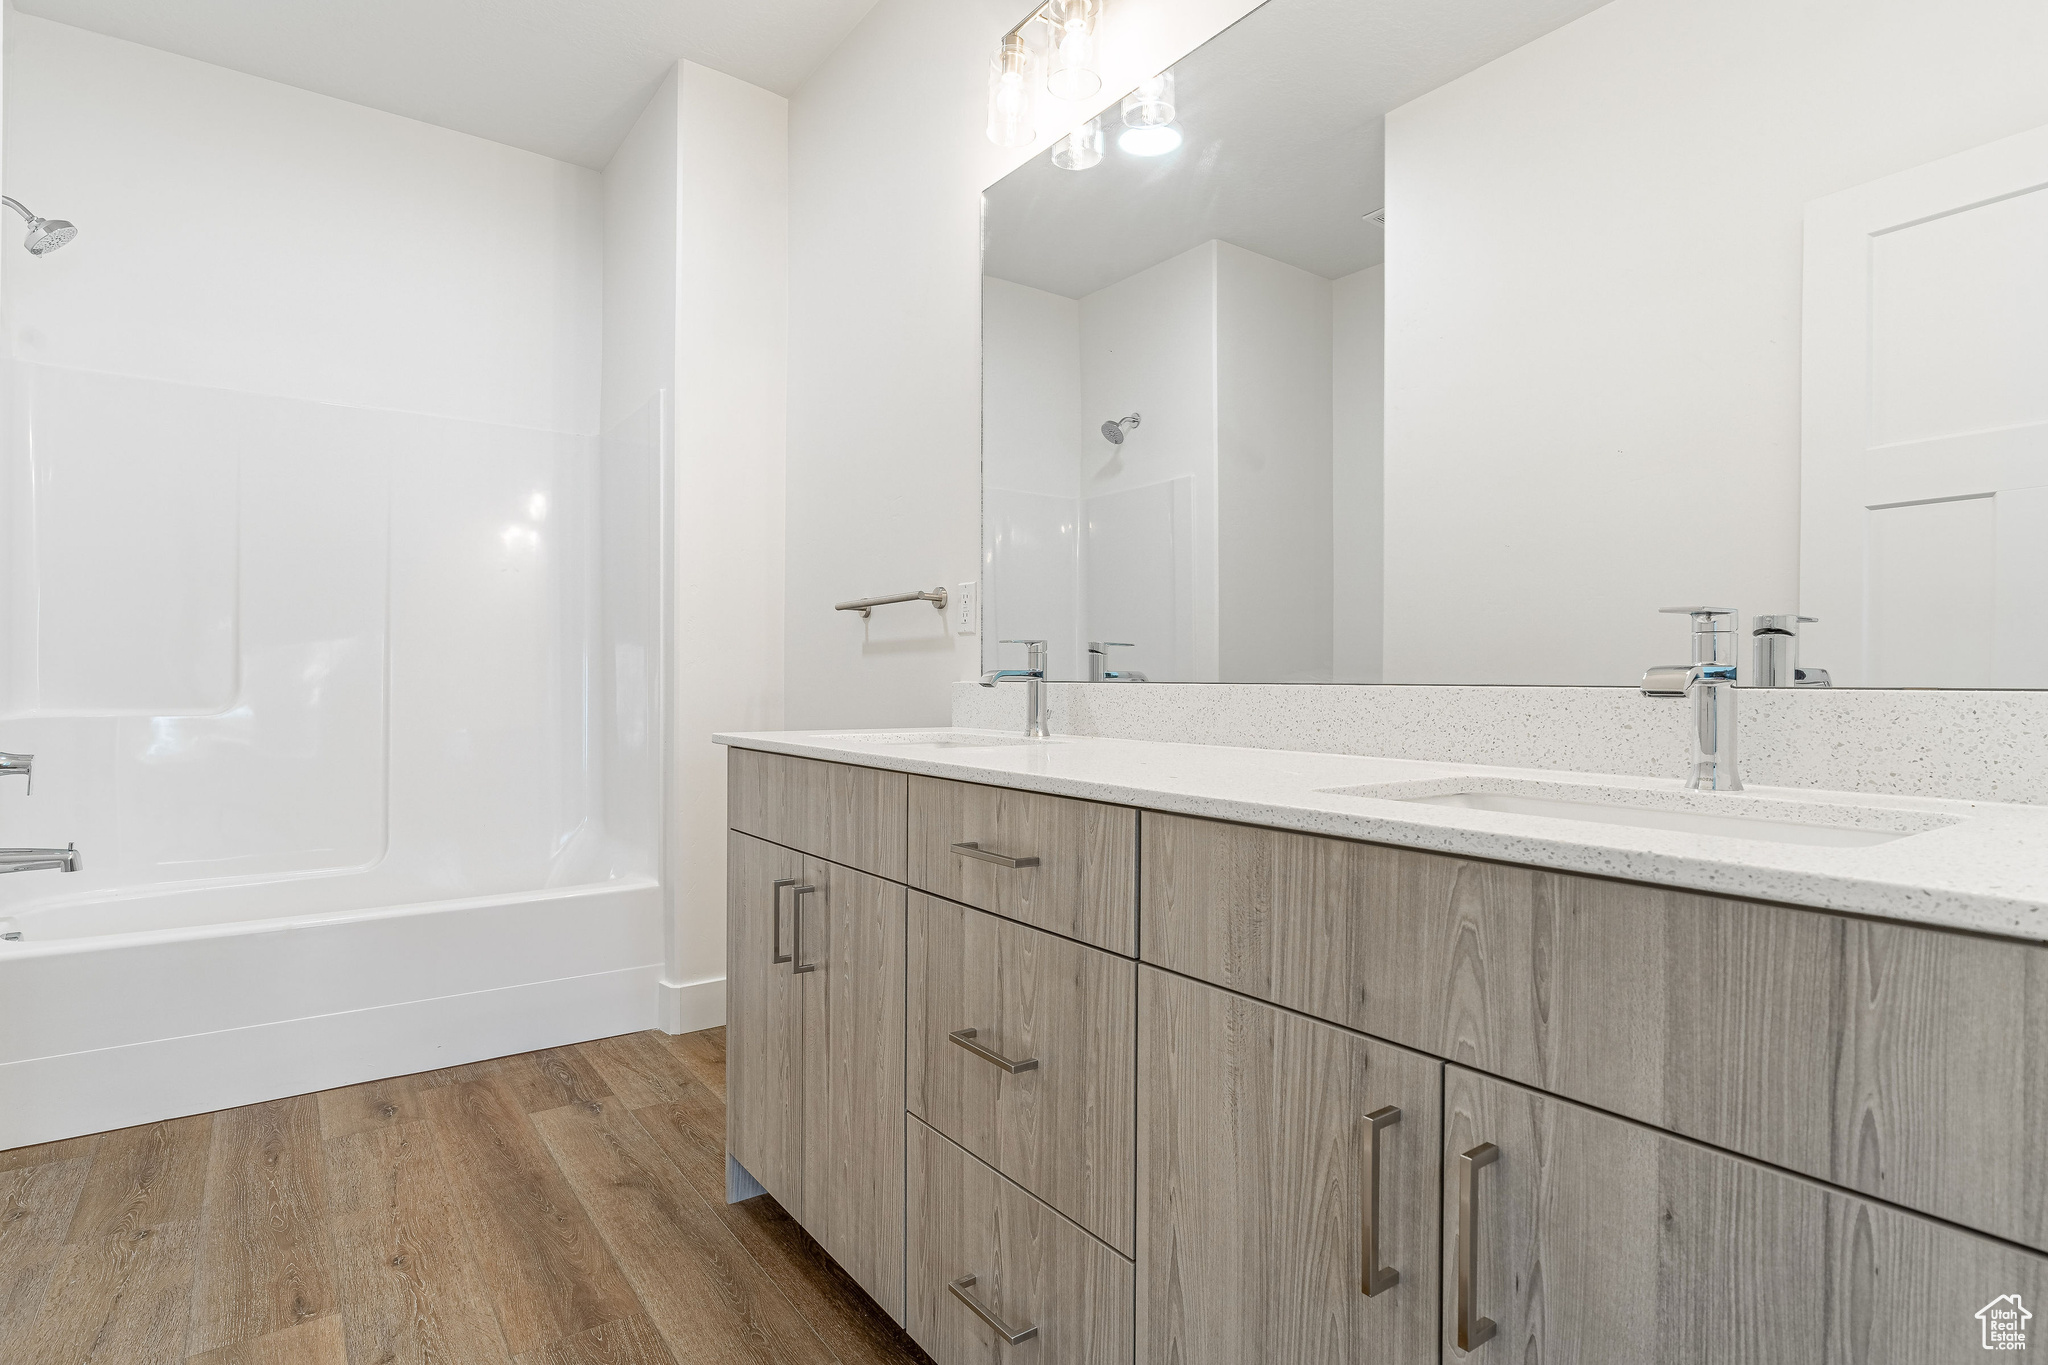 Bathroom with hardwood / wood-style floors, vanity with extensive cabinet space, shower / washtub combination, and double sink